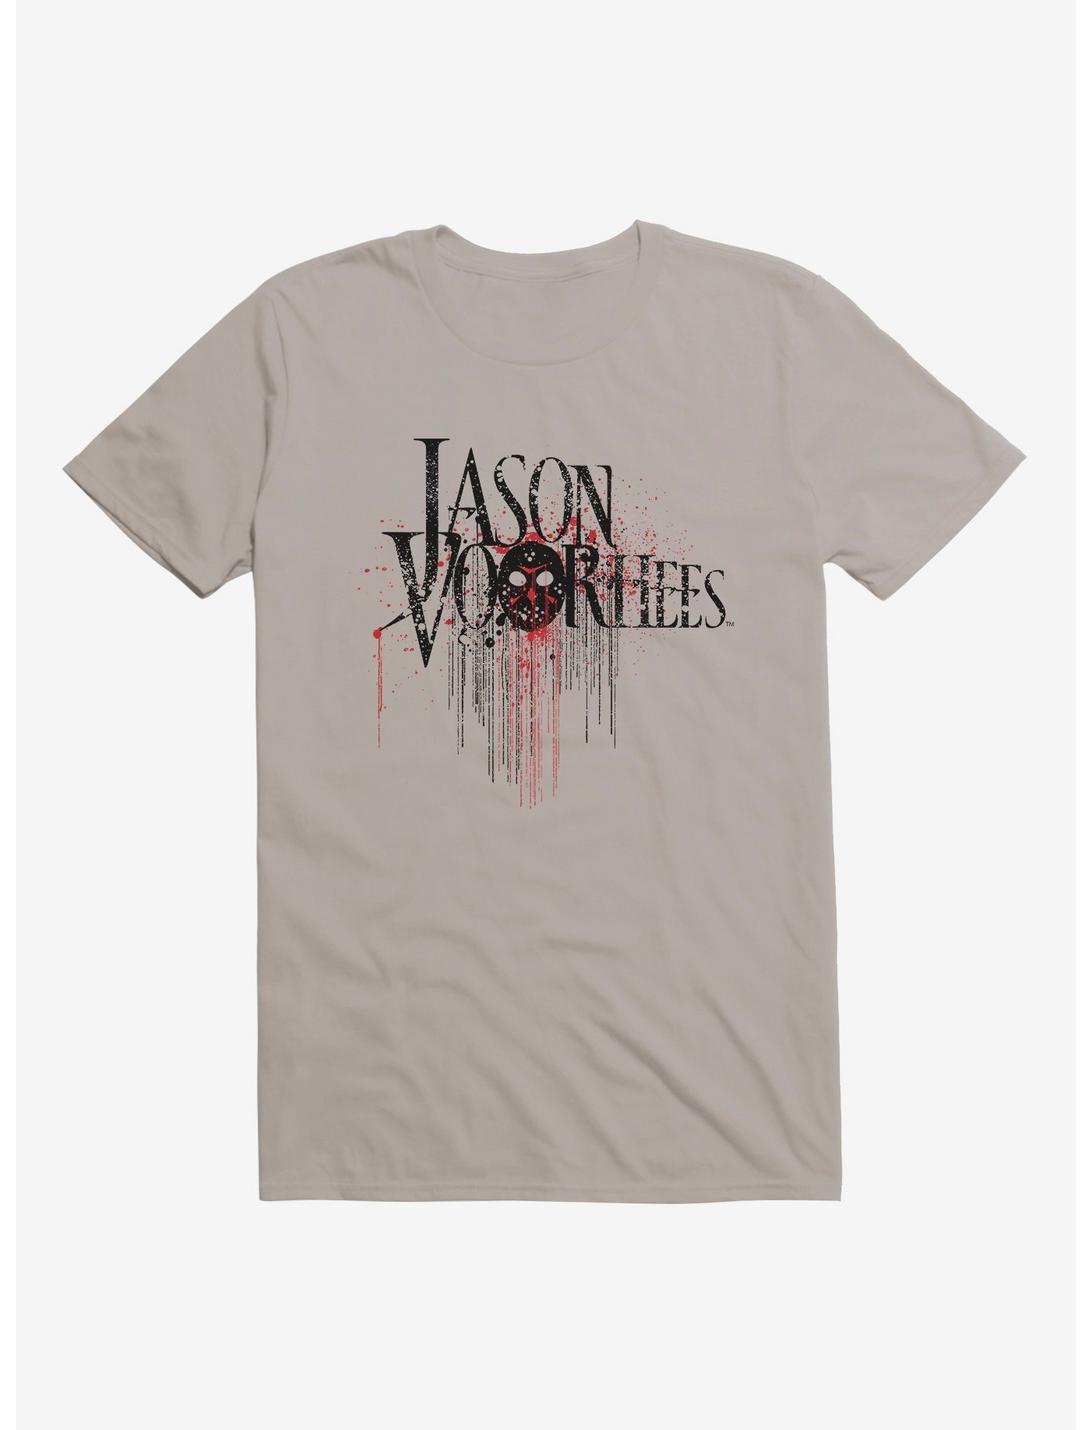 Friday The 13th Jason Voorhees T-Shirt, LIGHT GREY, hi-res